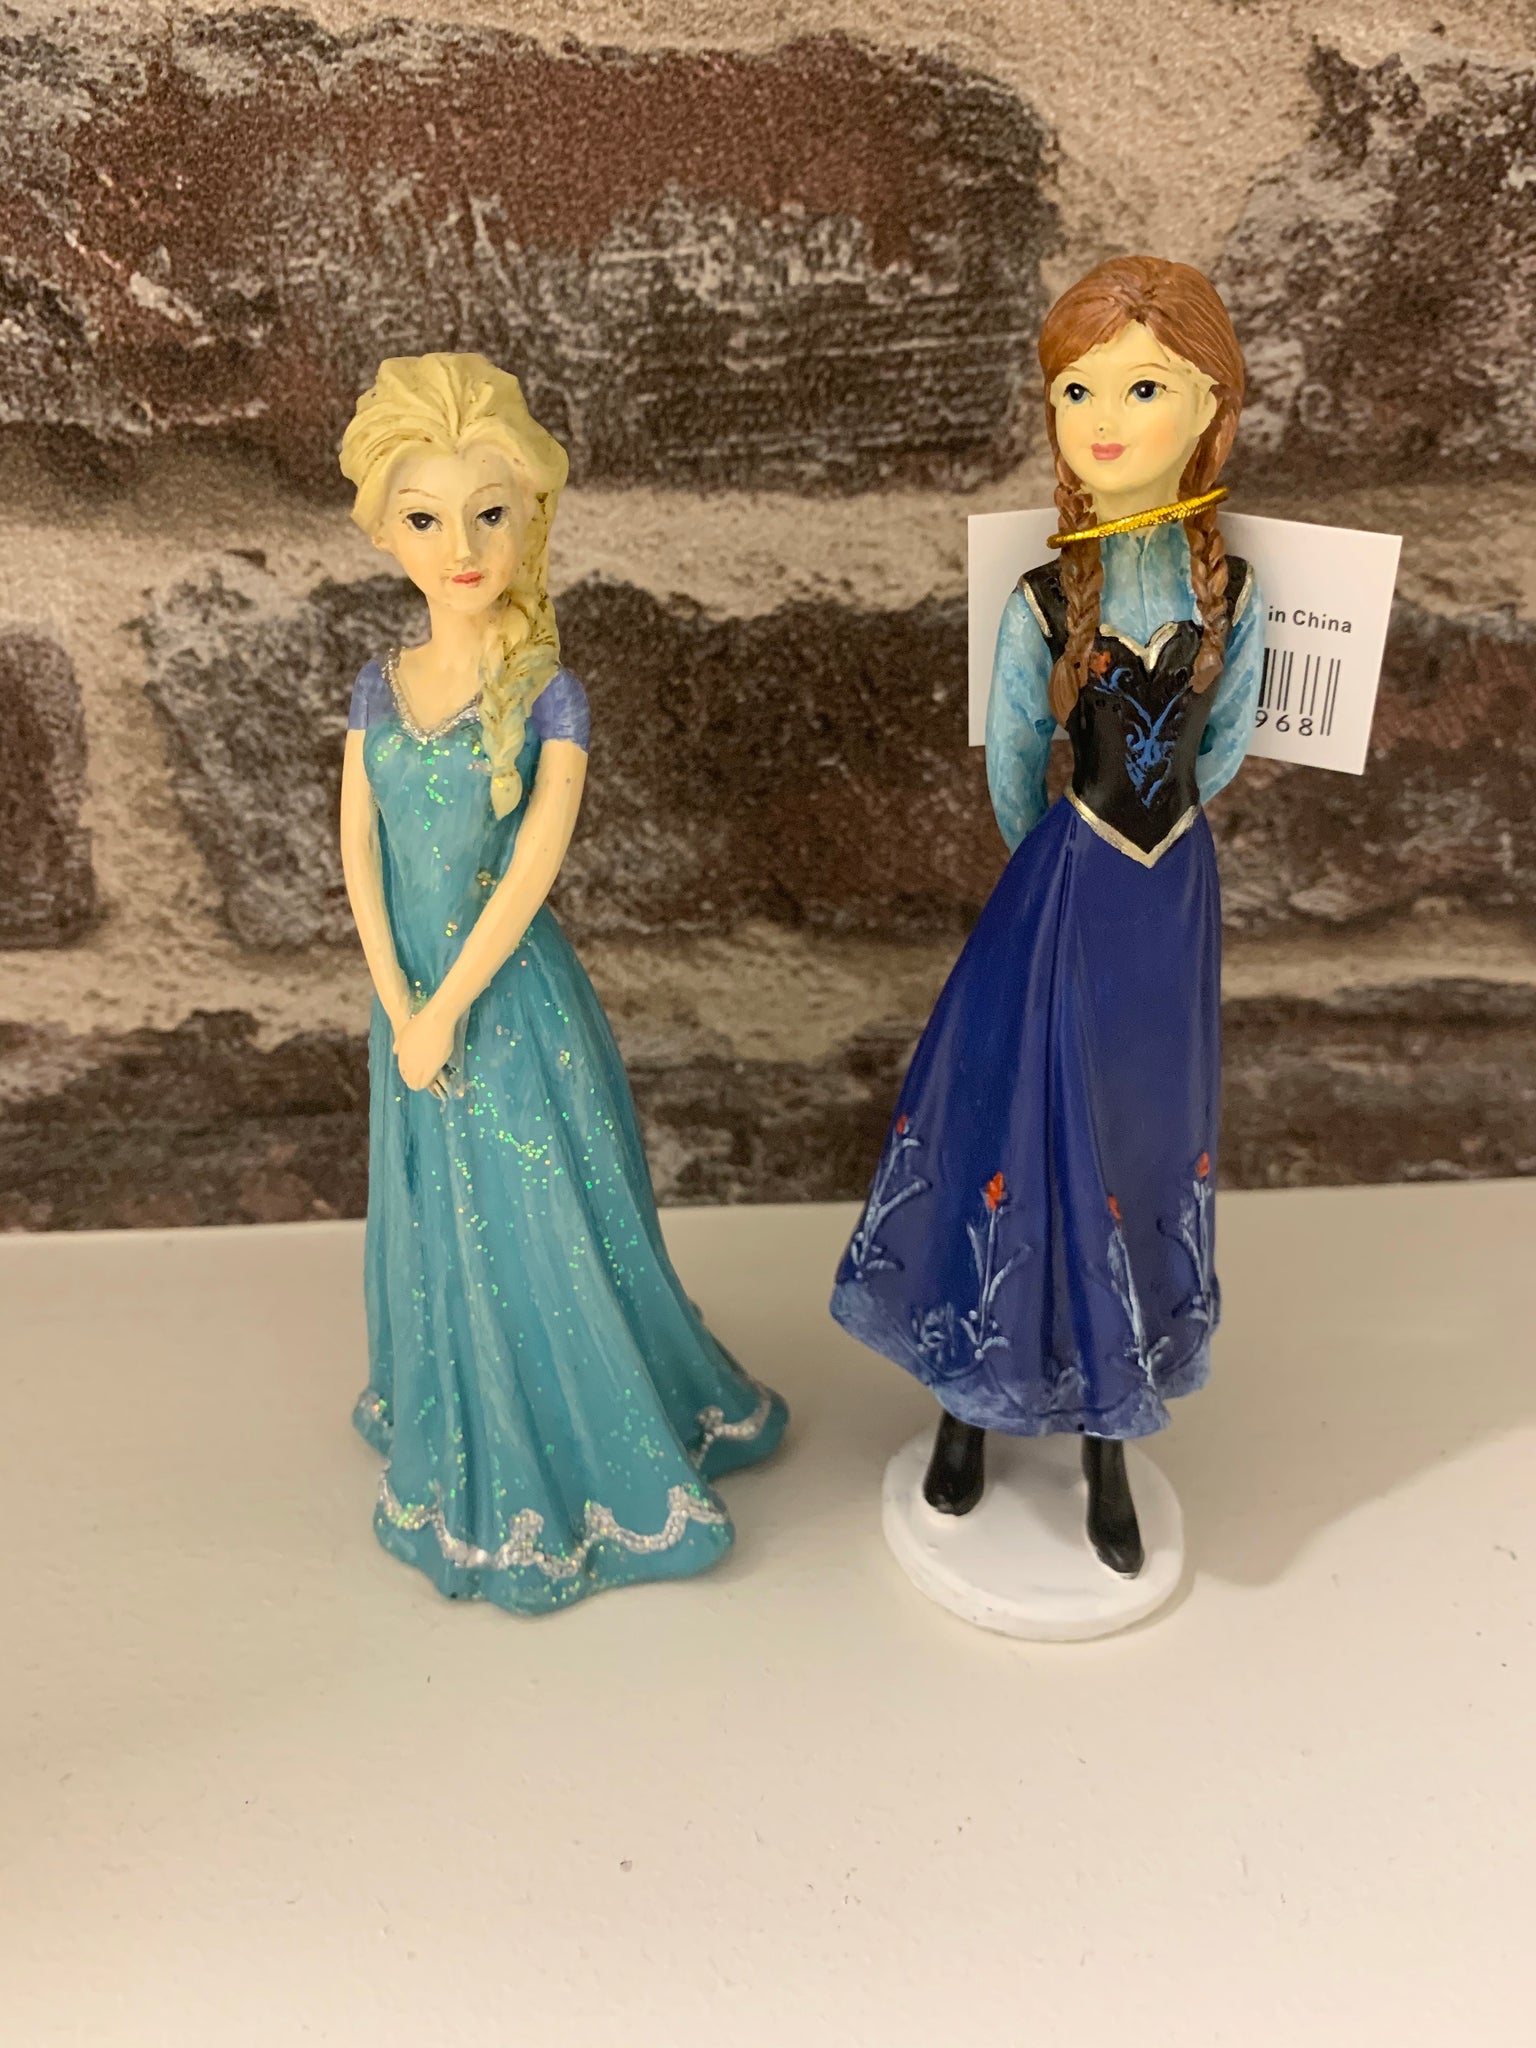 Else and Anna statue